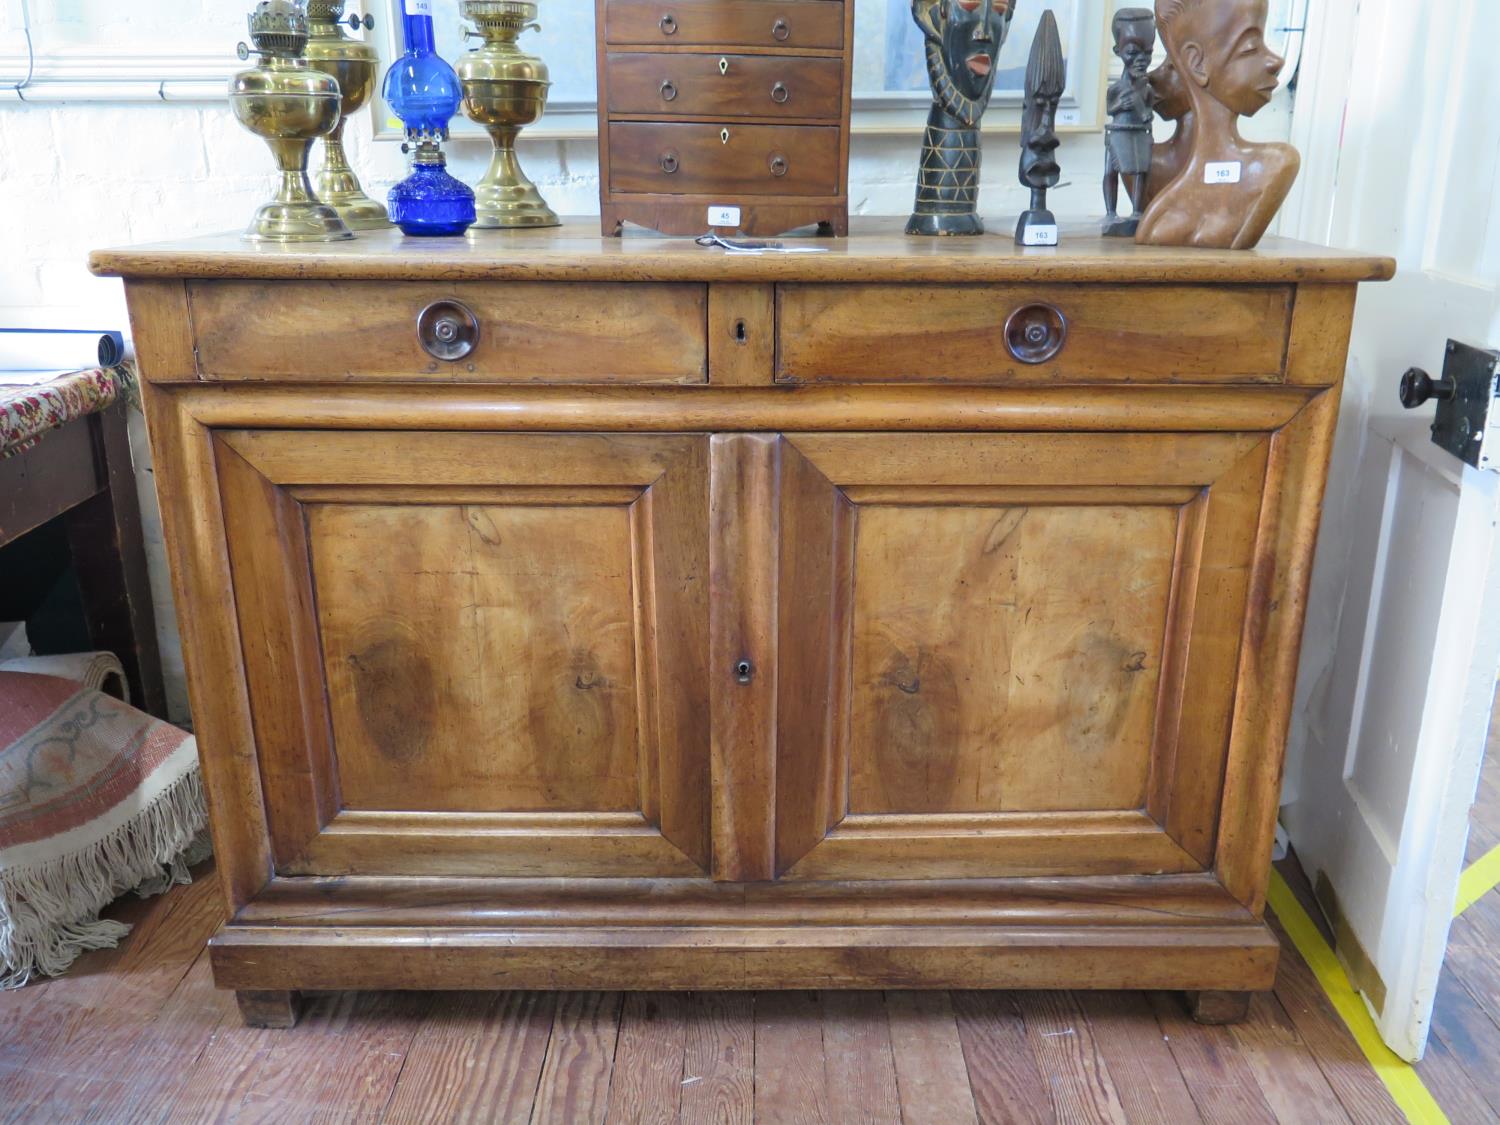 A 19th century French cherrywood buffet or sideboard, with two frieze drawers over a pair of